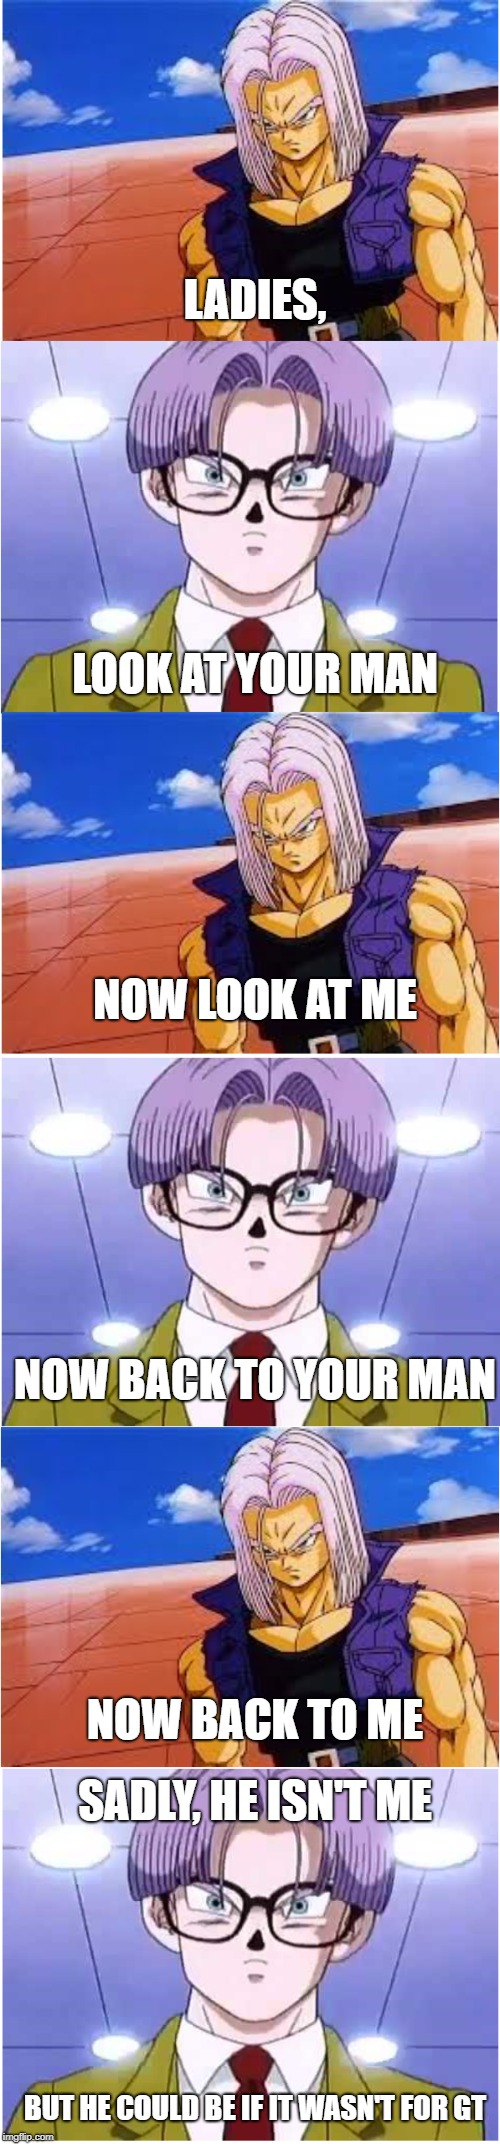 Trunks the ladies man | LADIES, LOOK AT YOUR MAN; NOW LOOK AT ME; NOW BACK TO YOUR MAN; NOW BACK TO ME; SADLY, HE ISN'T ME; BUT HE COULD BE IF IT WASN'T FOR GT | image tagged in dragon ball z,dragonball | made w/ Imgflip meme maker